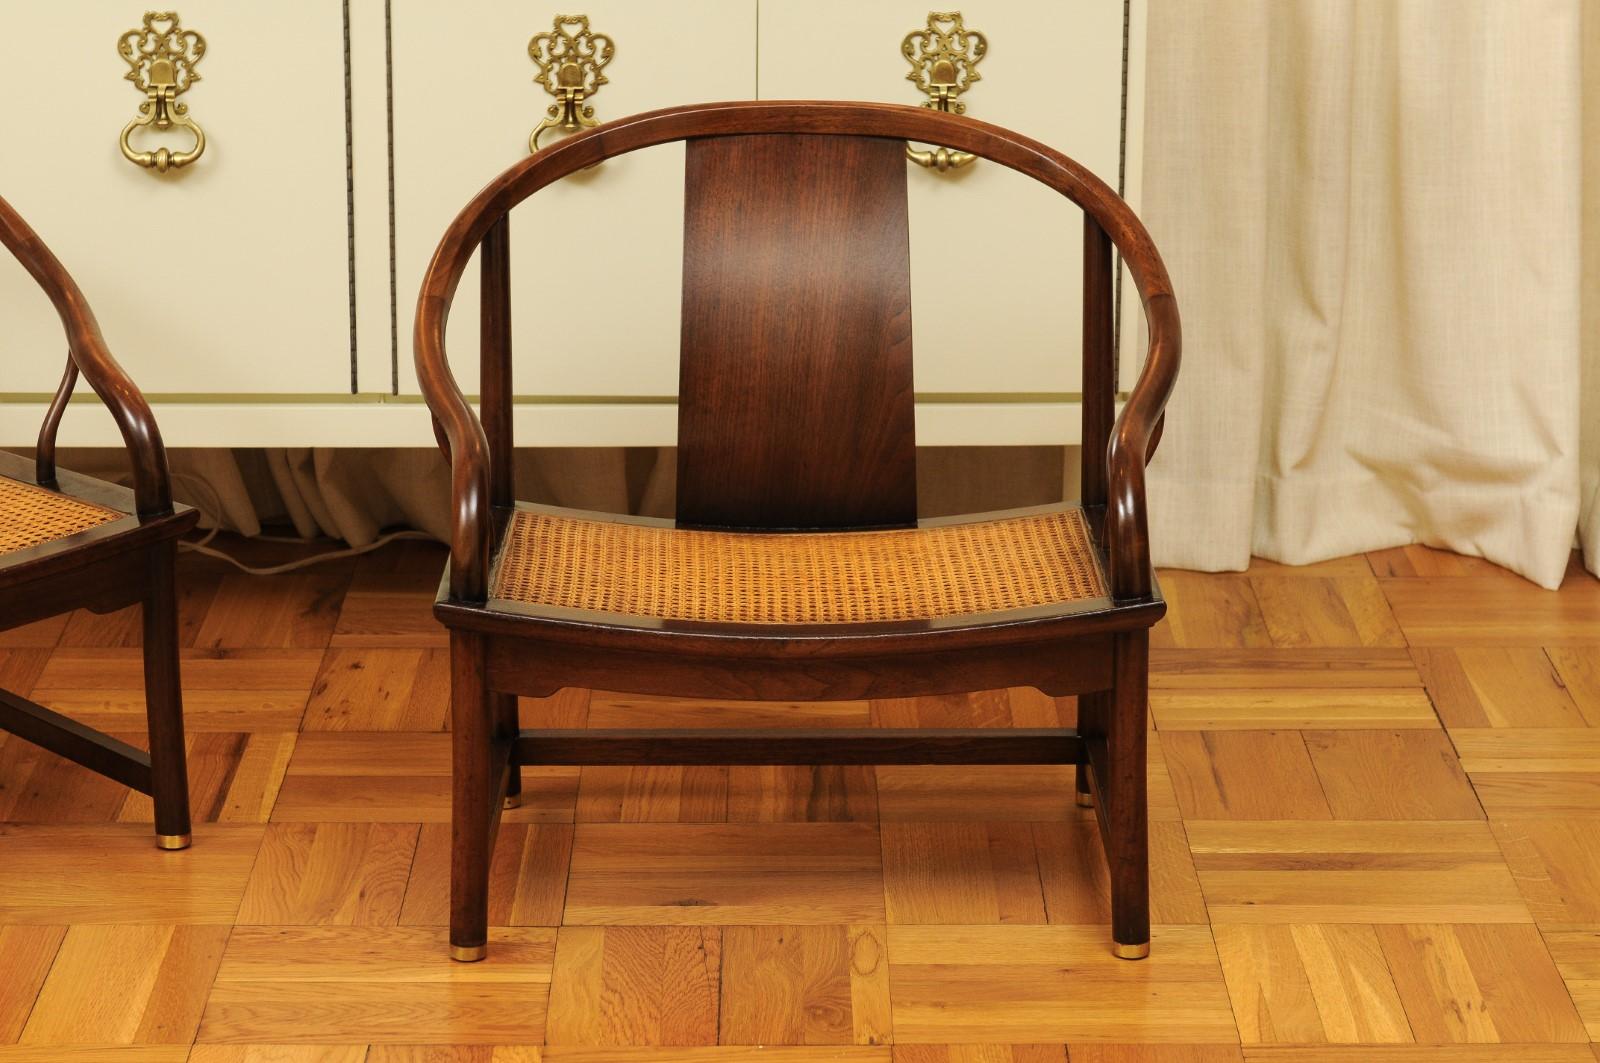 North American Stunning Restored Pair of Walnut Cane Loungers by Michael Taylor, circa 1960 For Sale